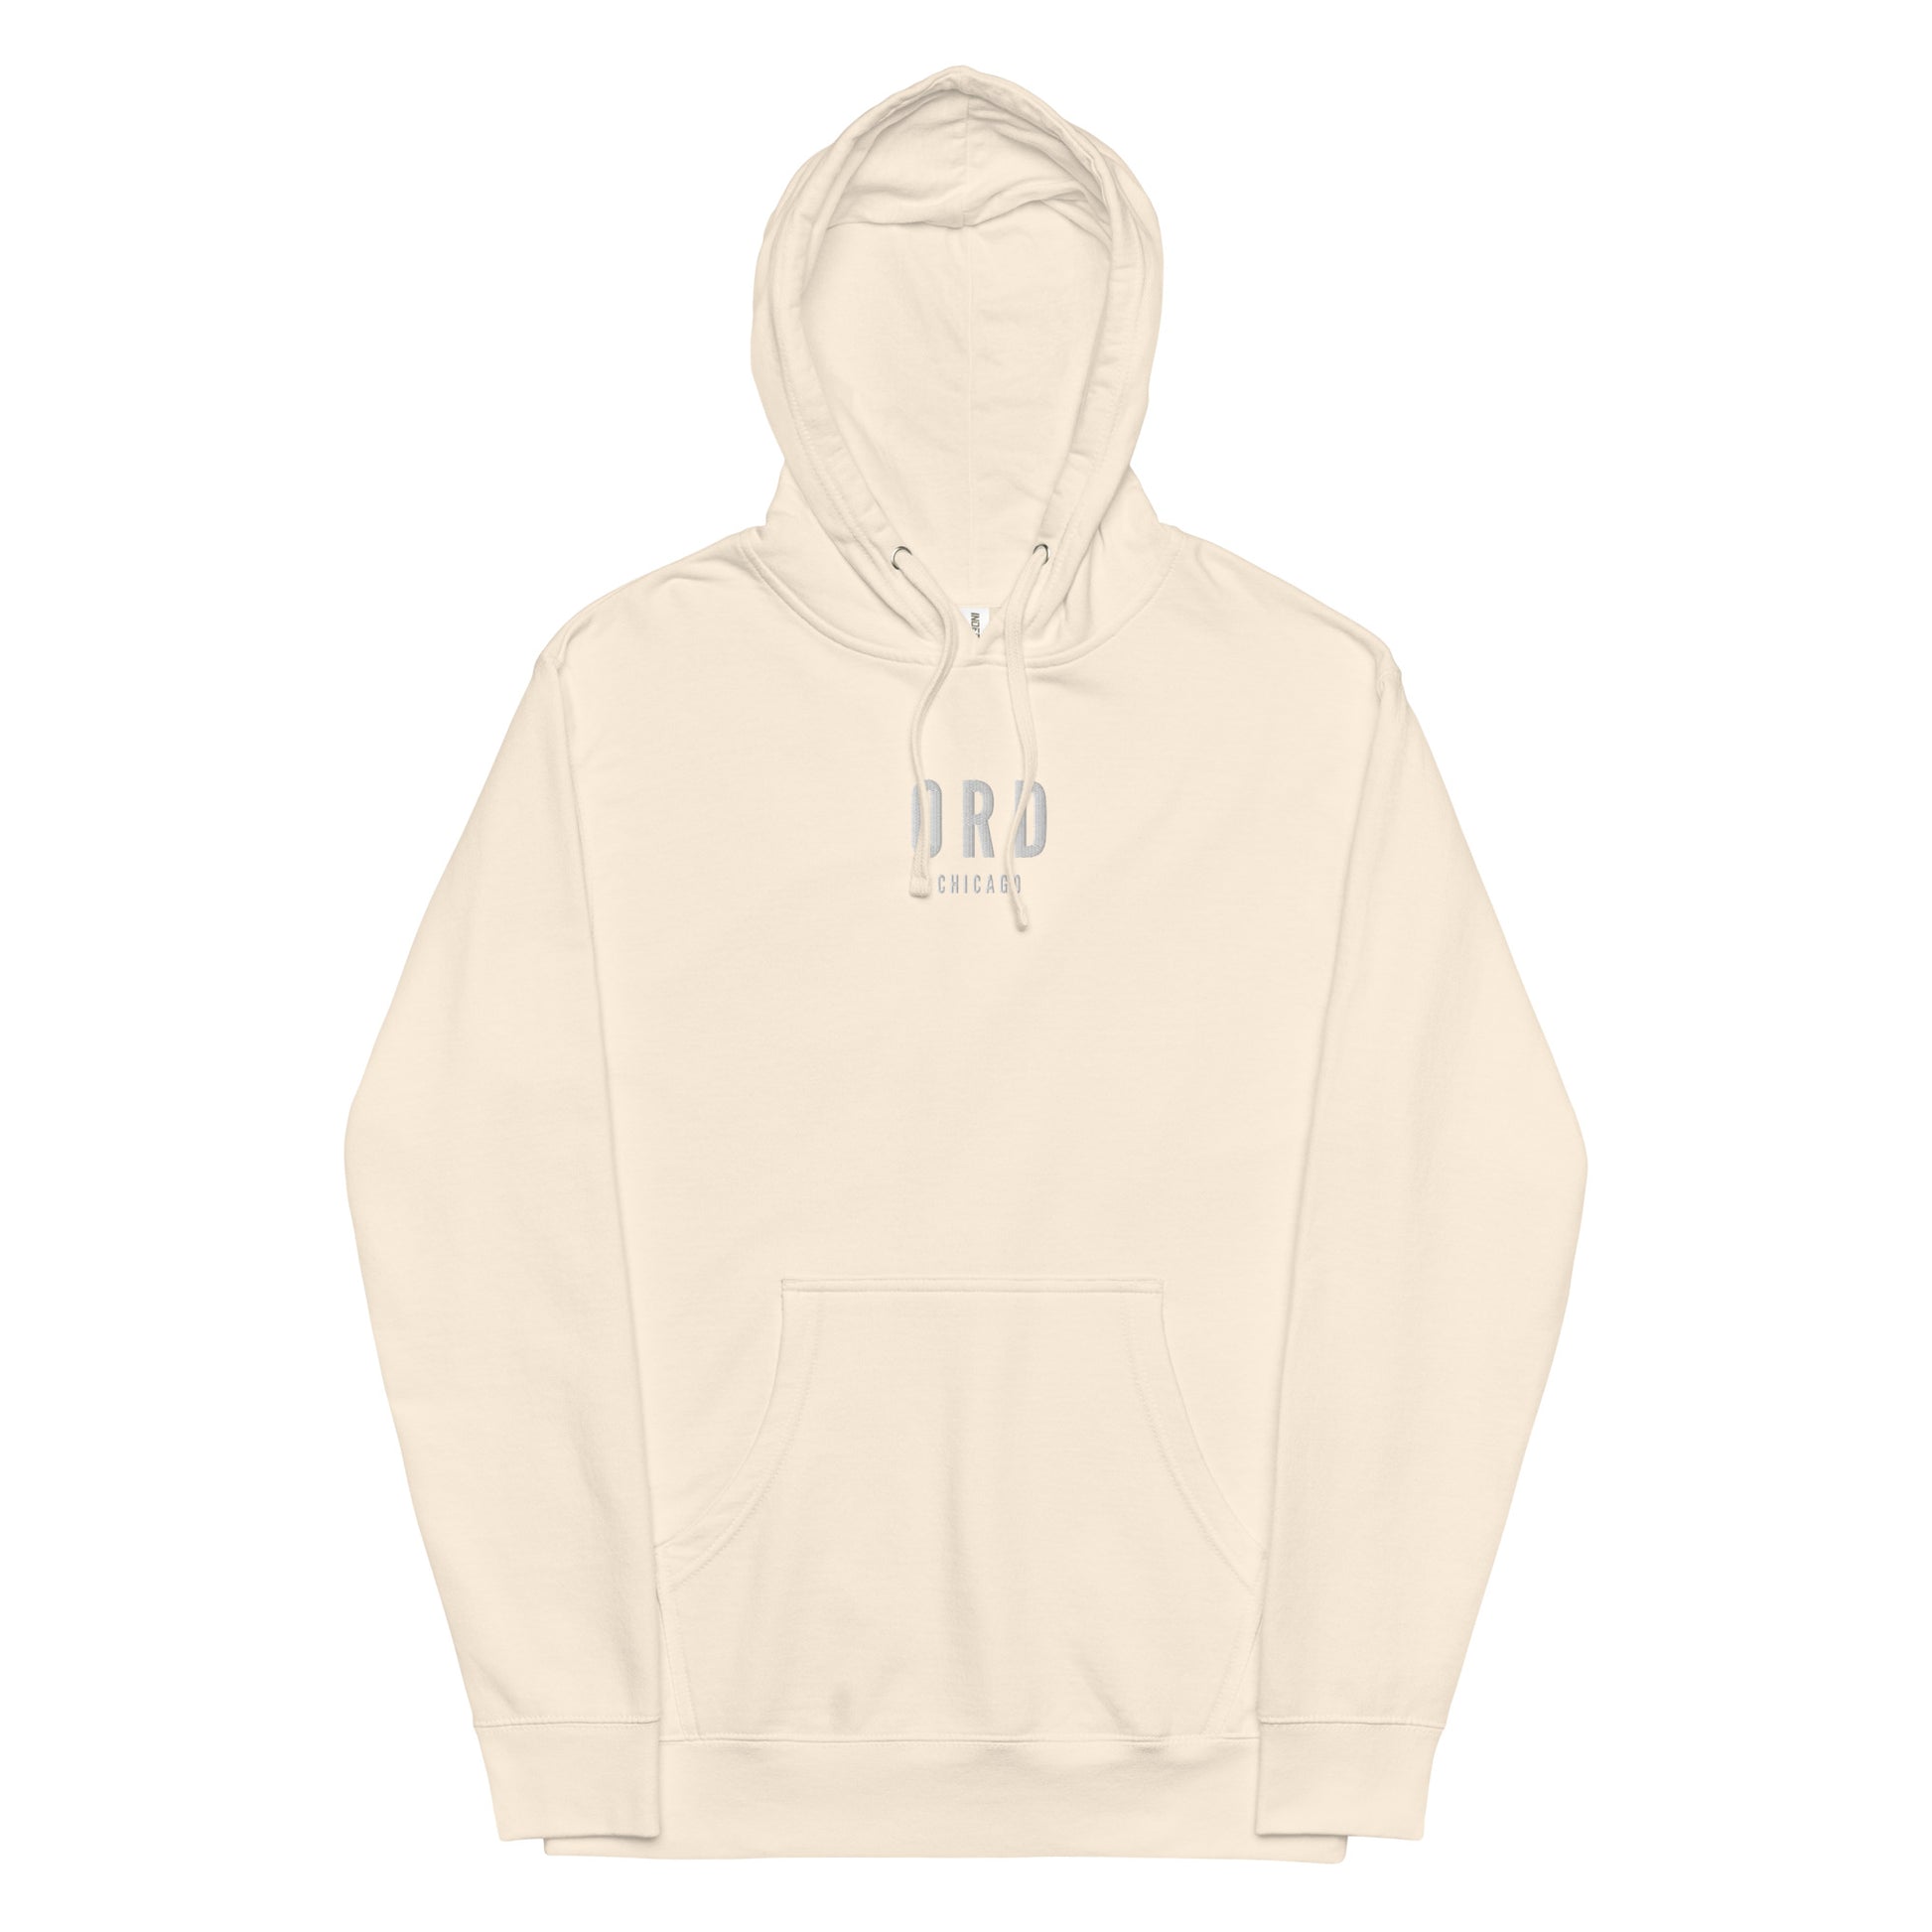 City Midweight Hoodie - White • ORD Chicago • YHM Designs - Image 17